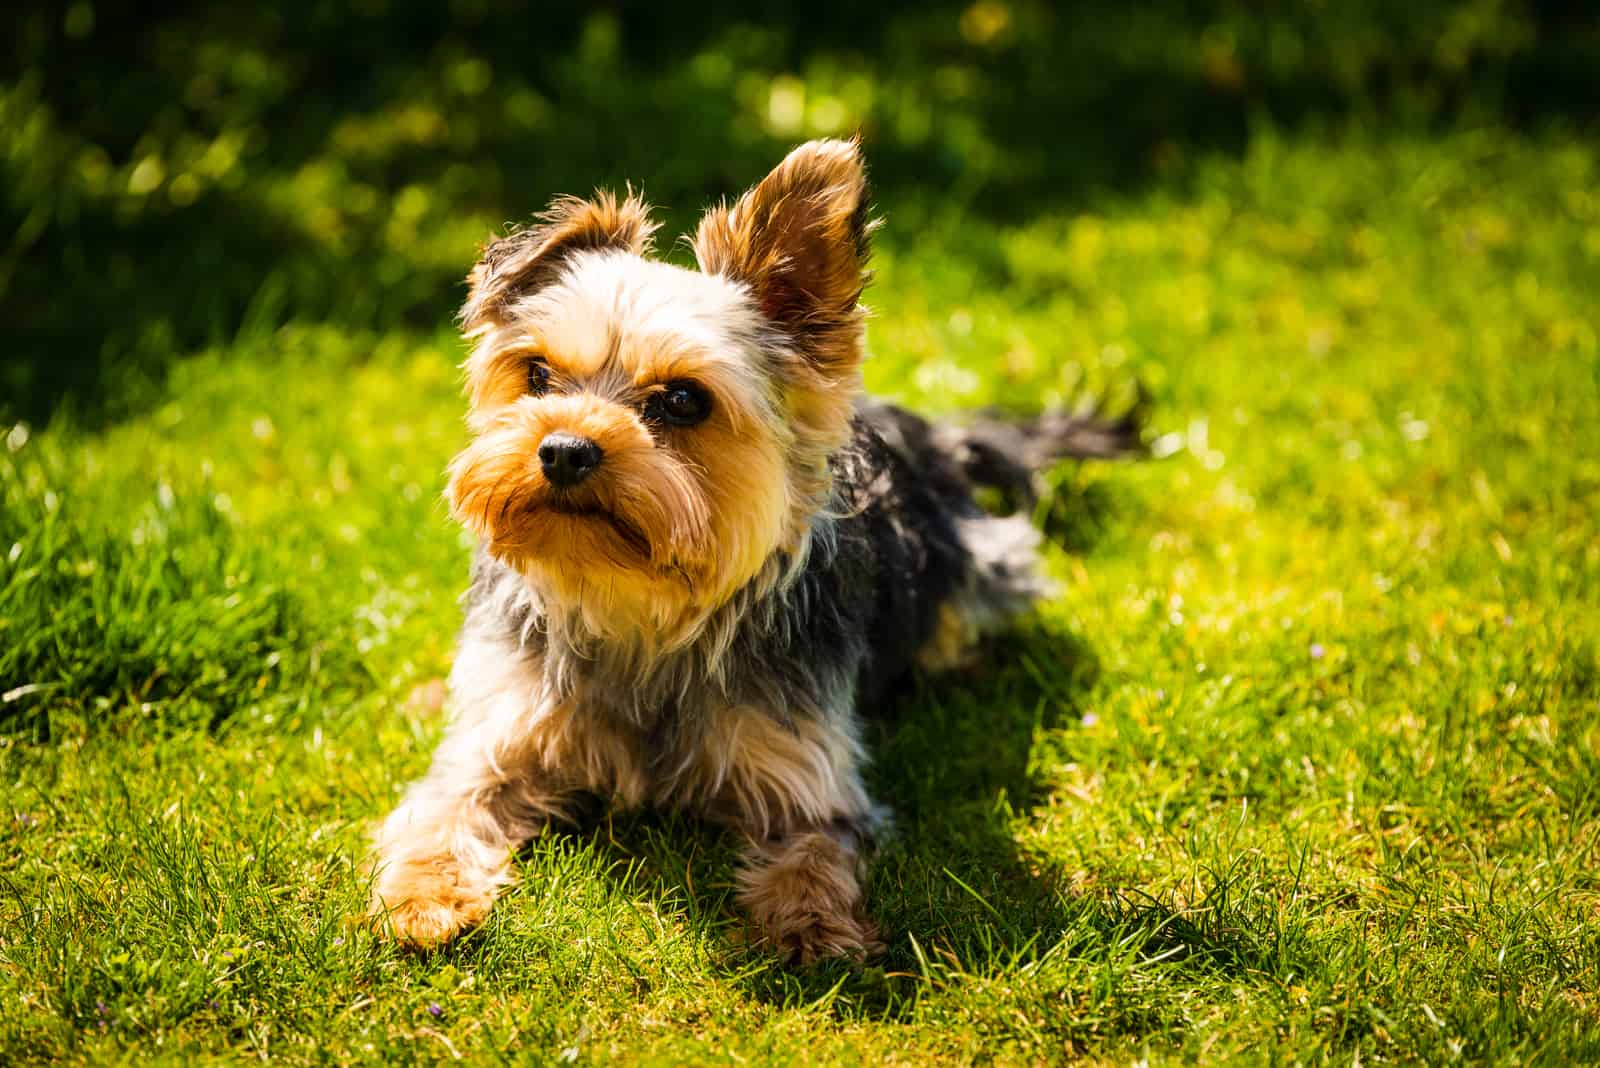 Yorkie lies in the grass